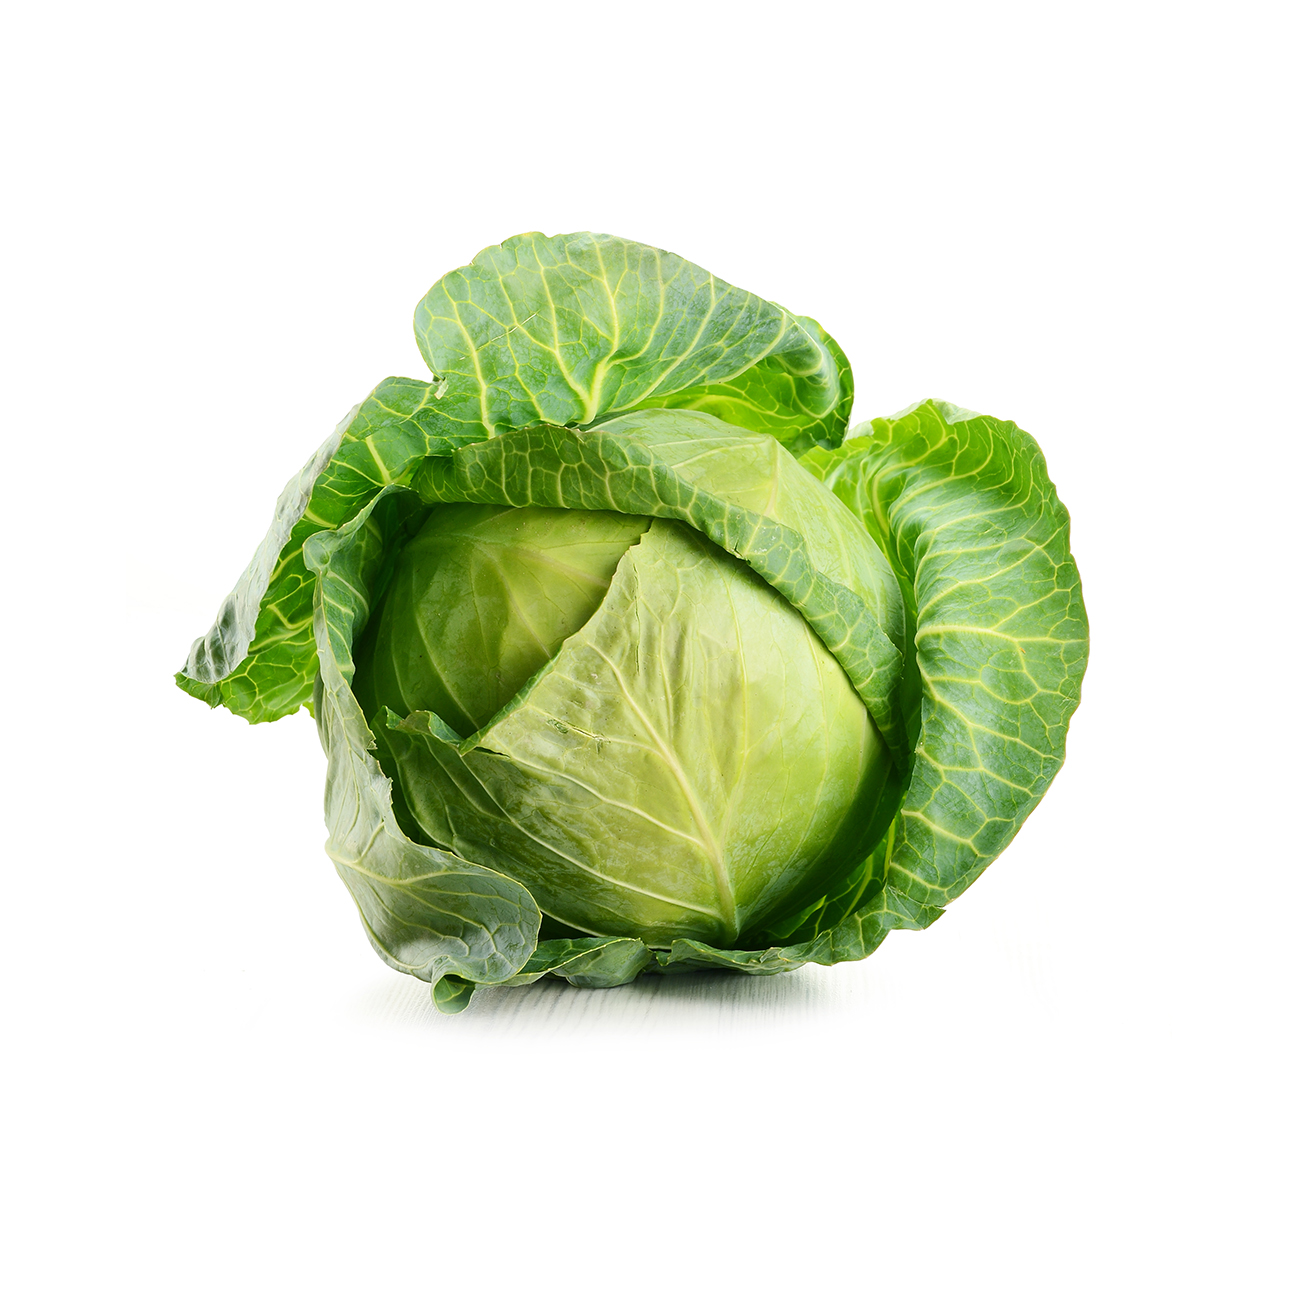 Cabbage, white or green